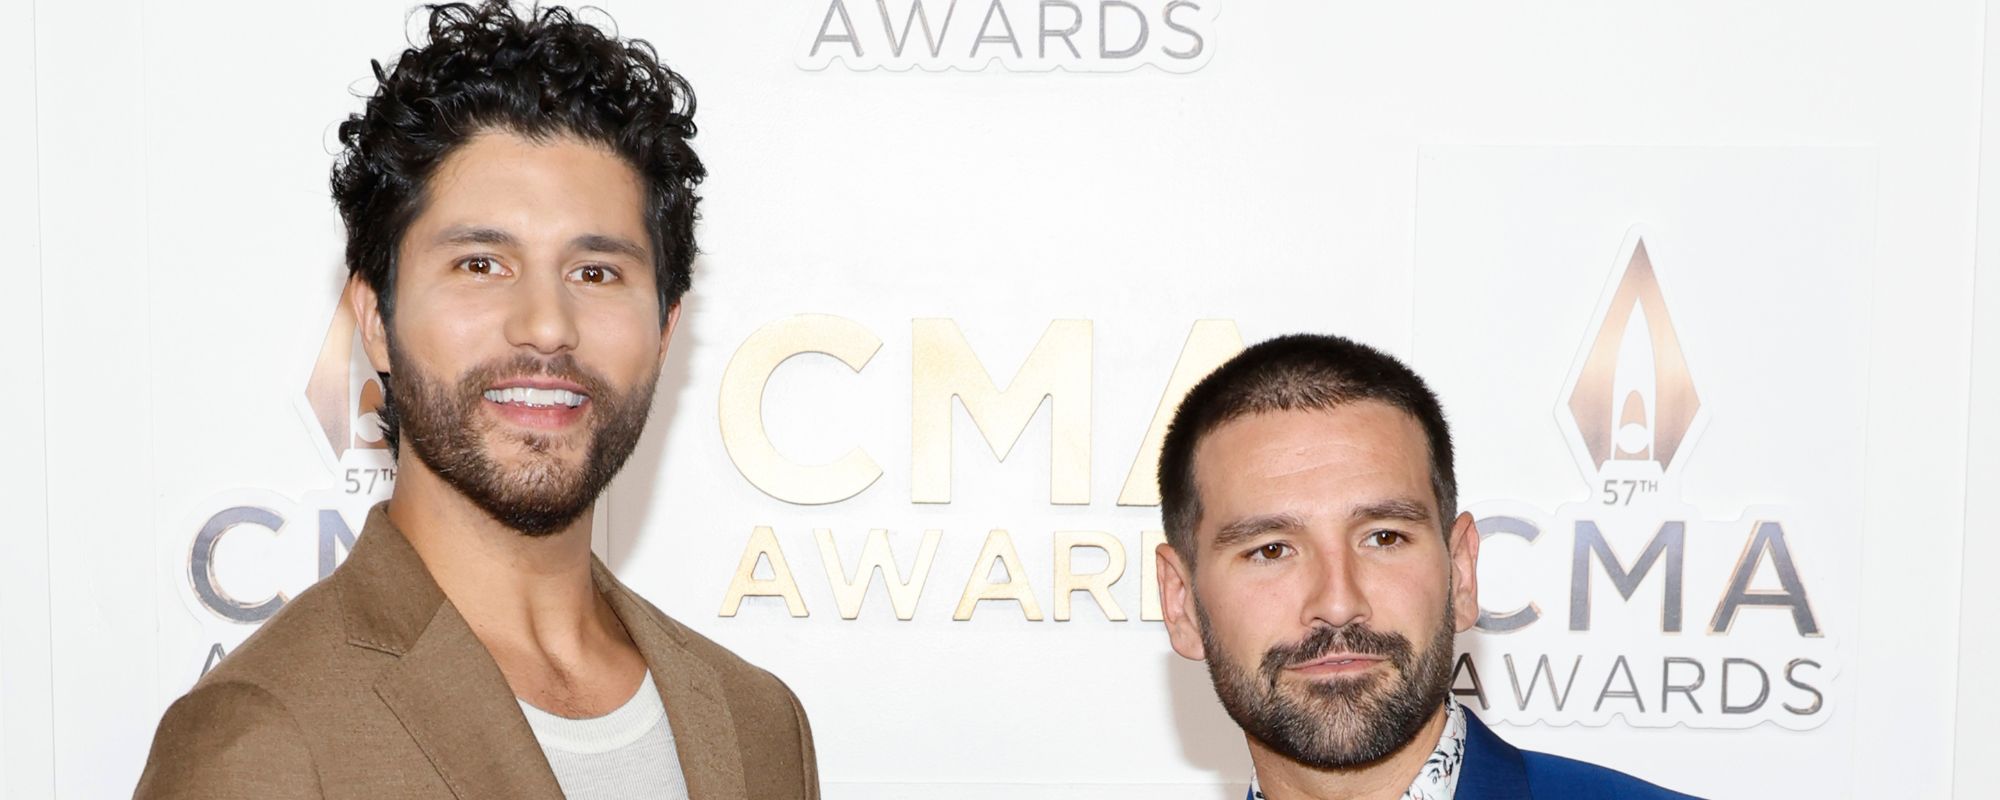 Incensed Viewers Accuse Dan + Shay of Ruining ‘The Voice’